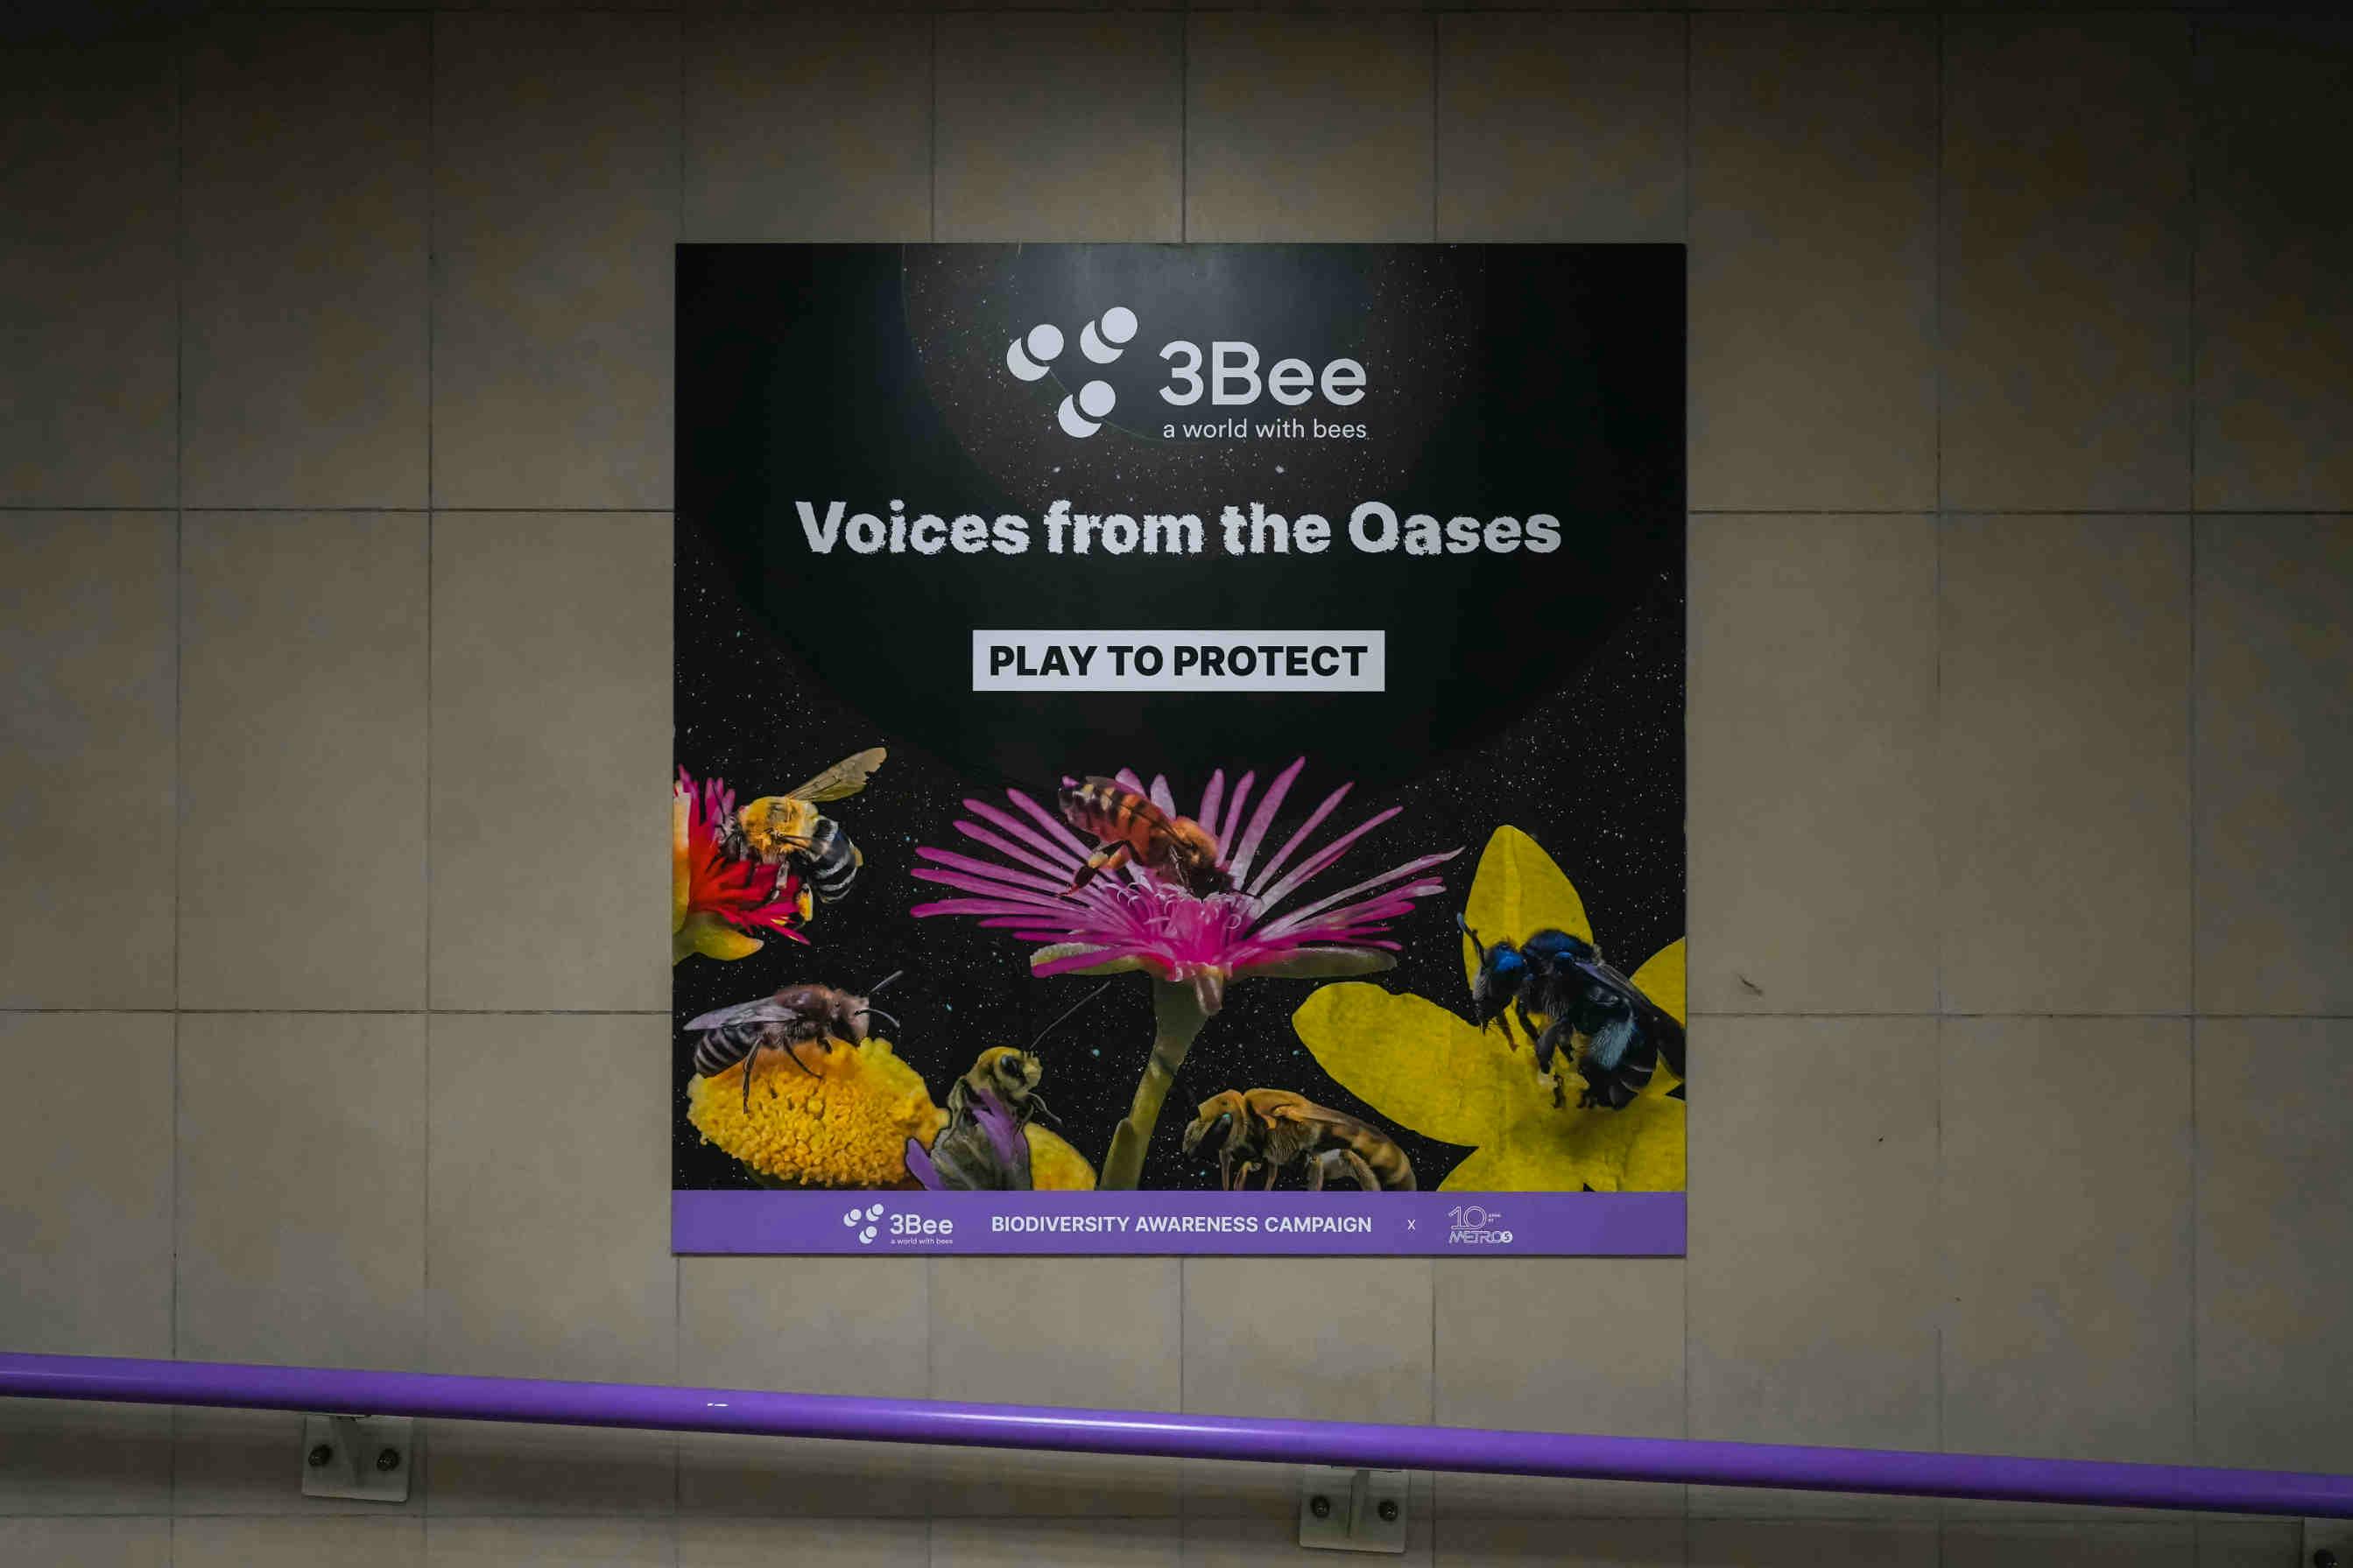 “Voices from the Oases": die 3Bee-Playlist